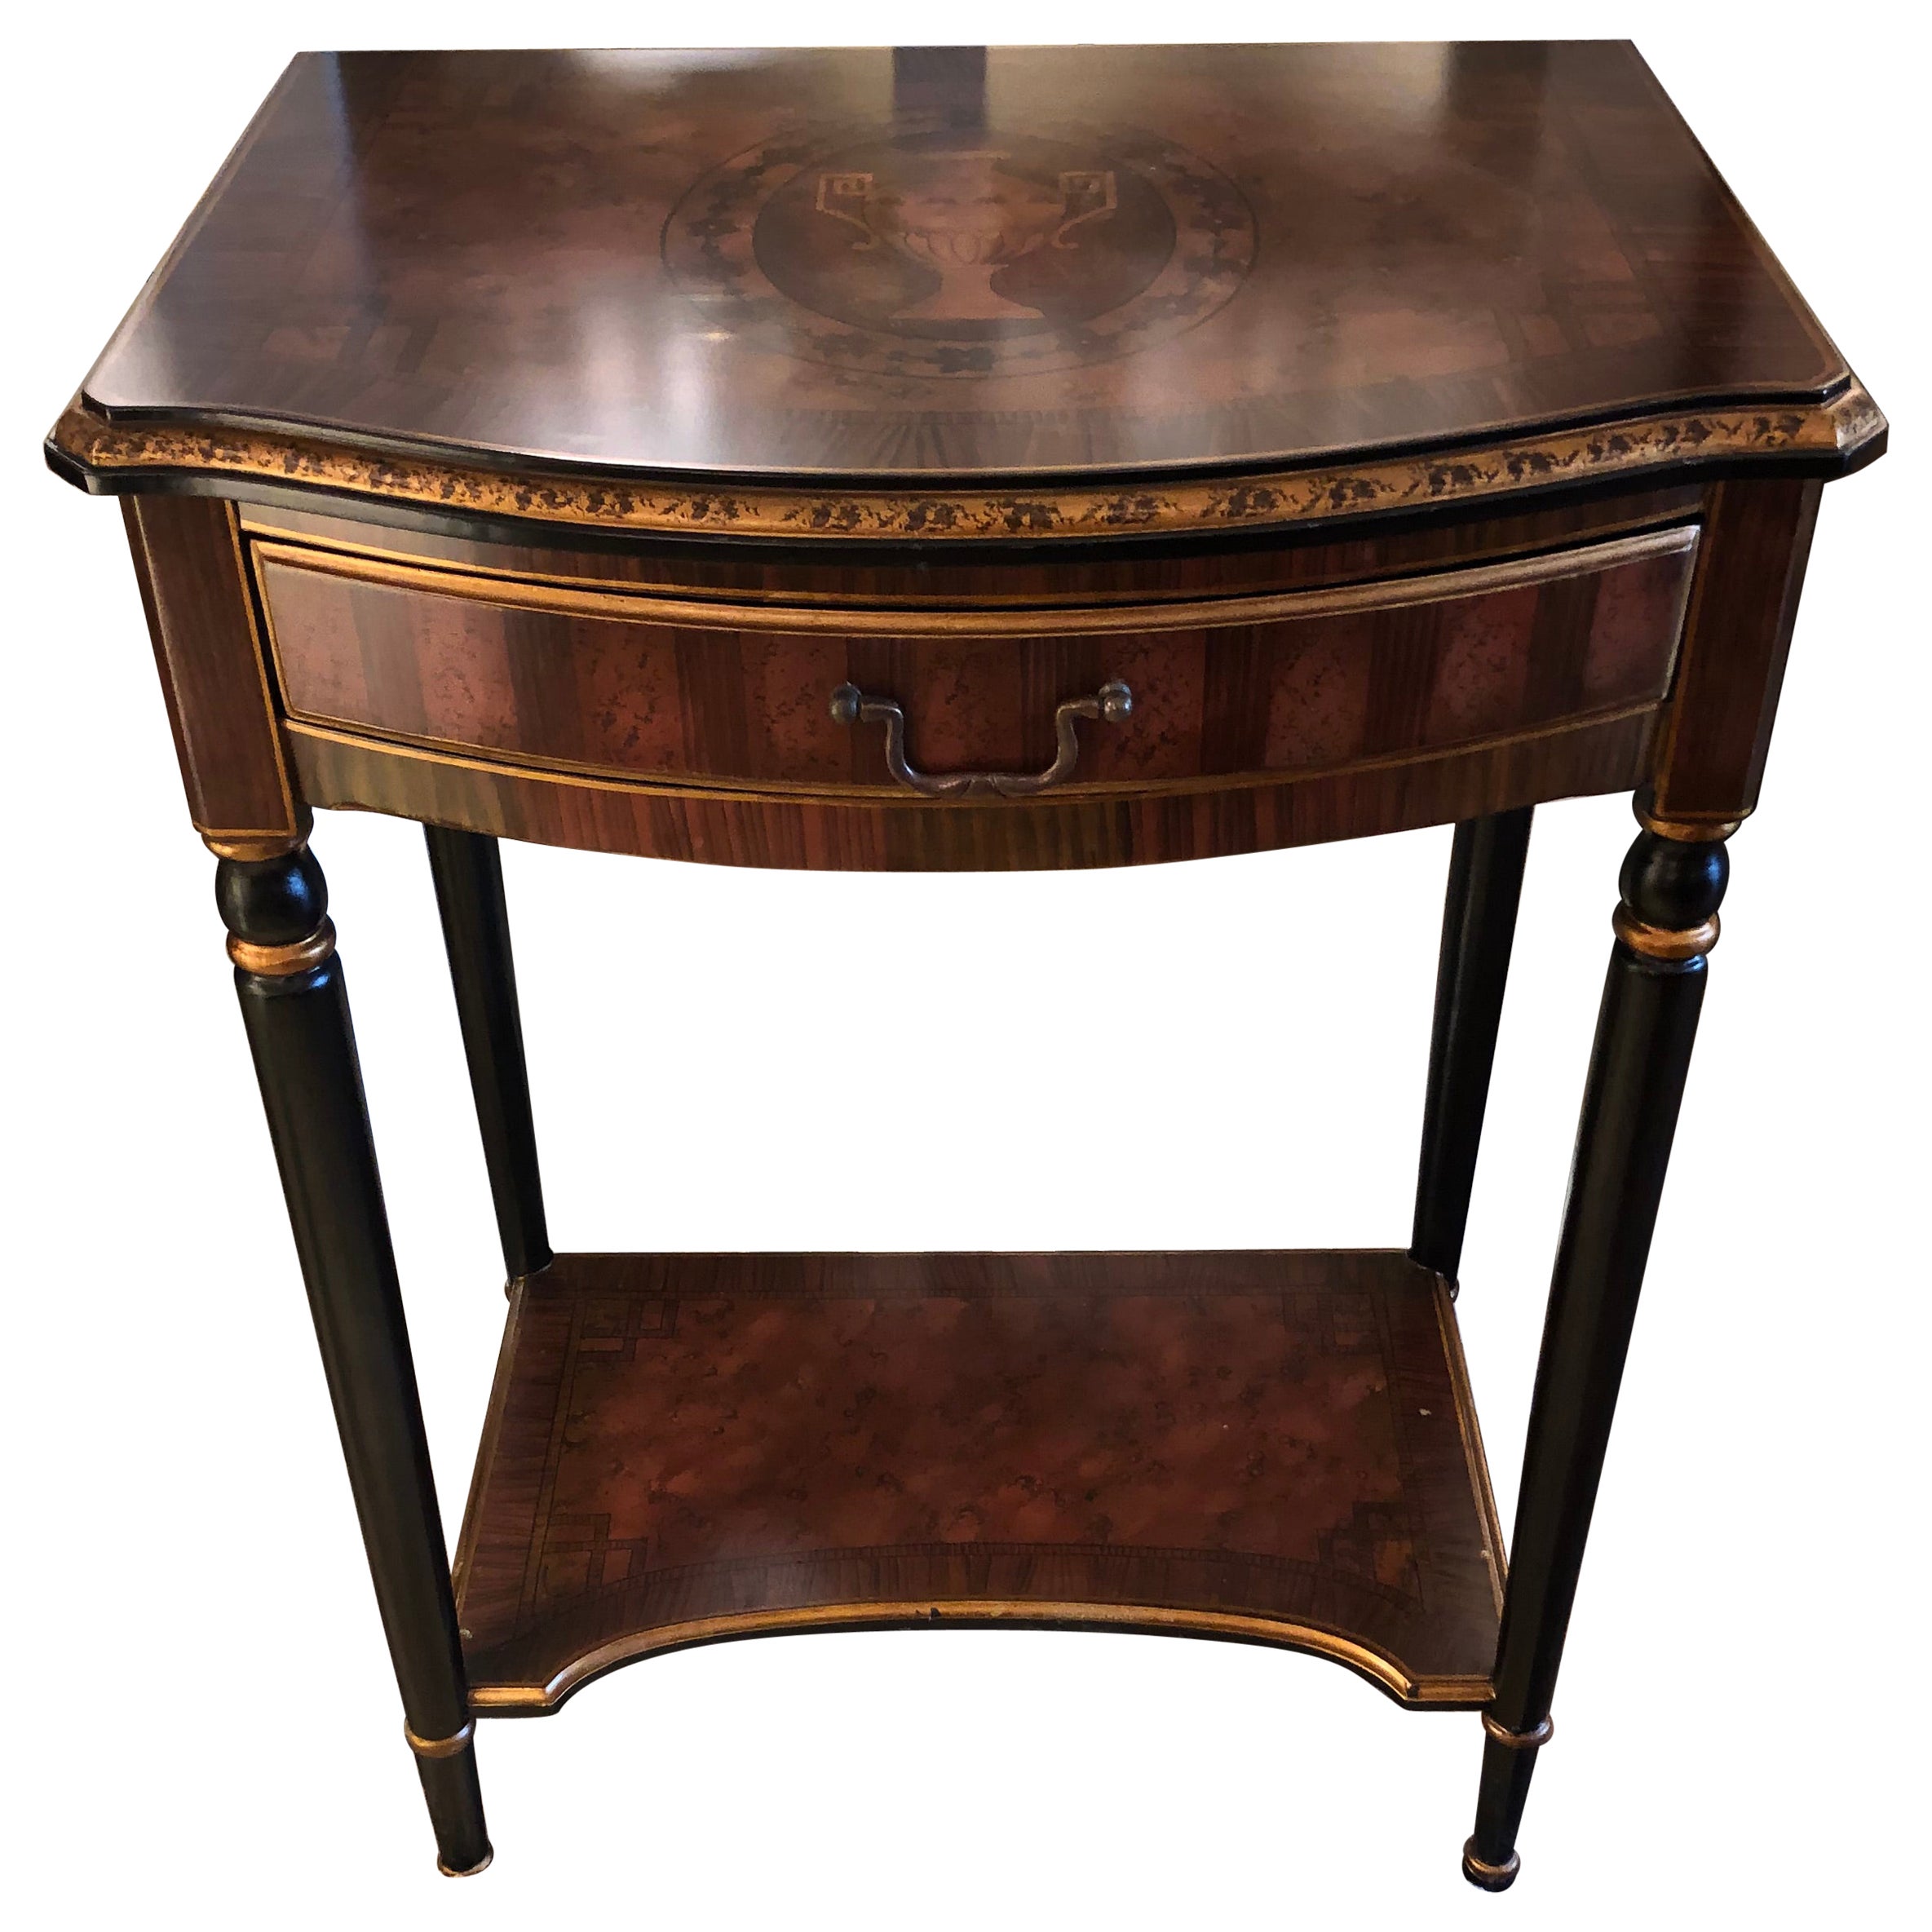 French Style Painted Wood Side Table with Urn Decoration